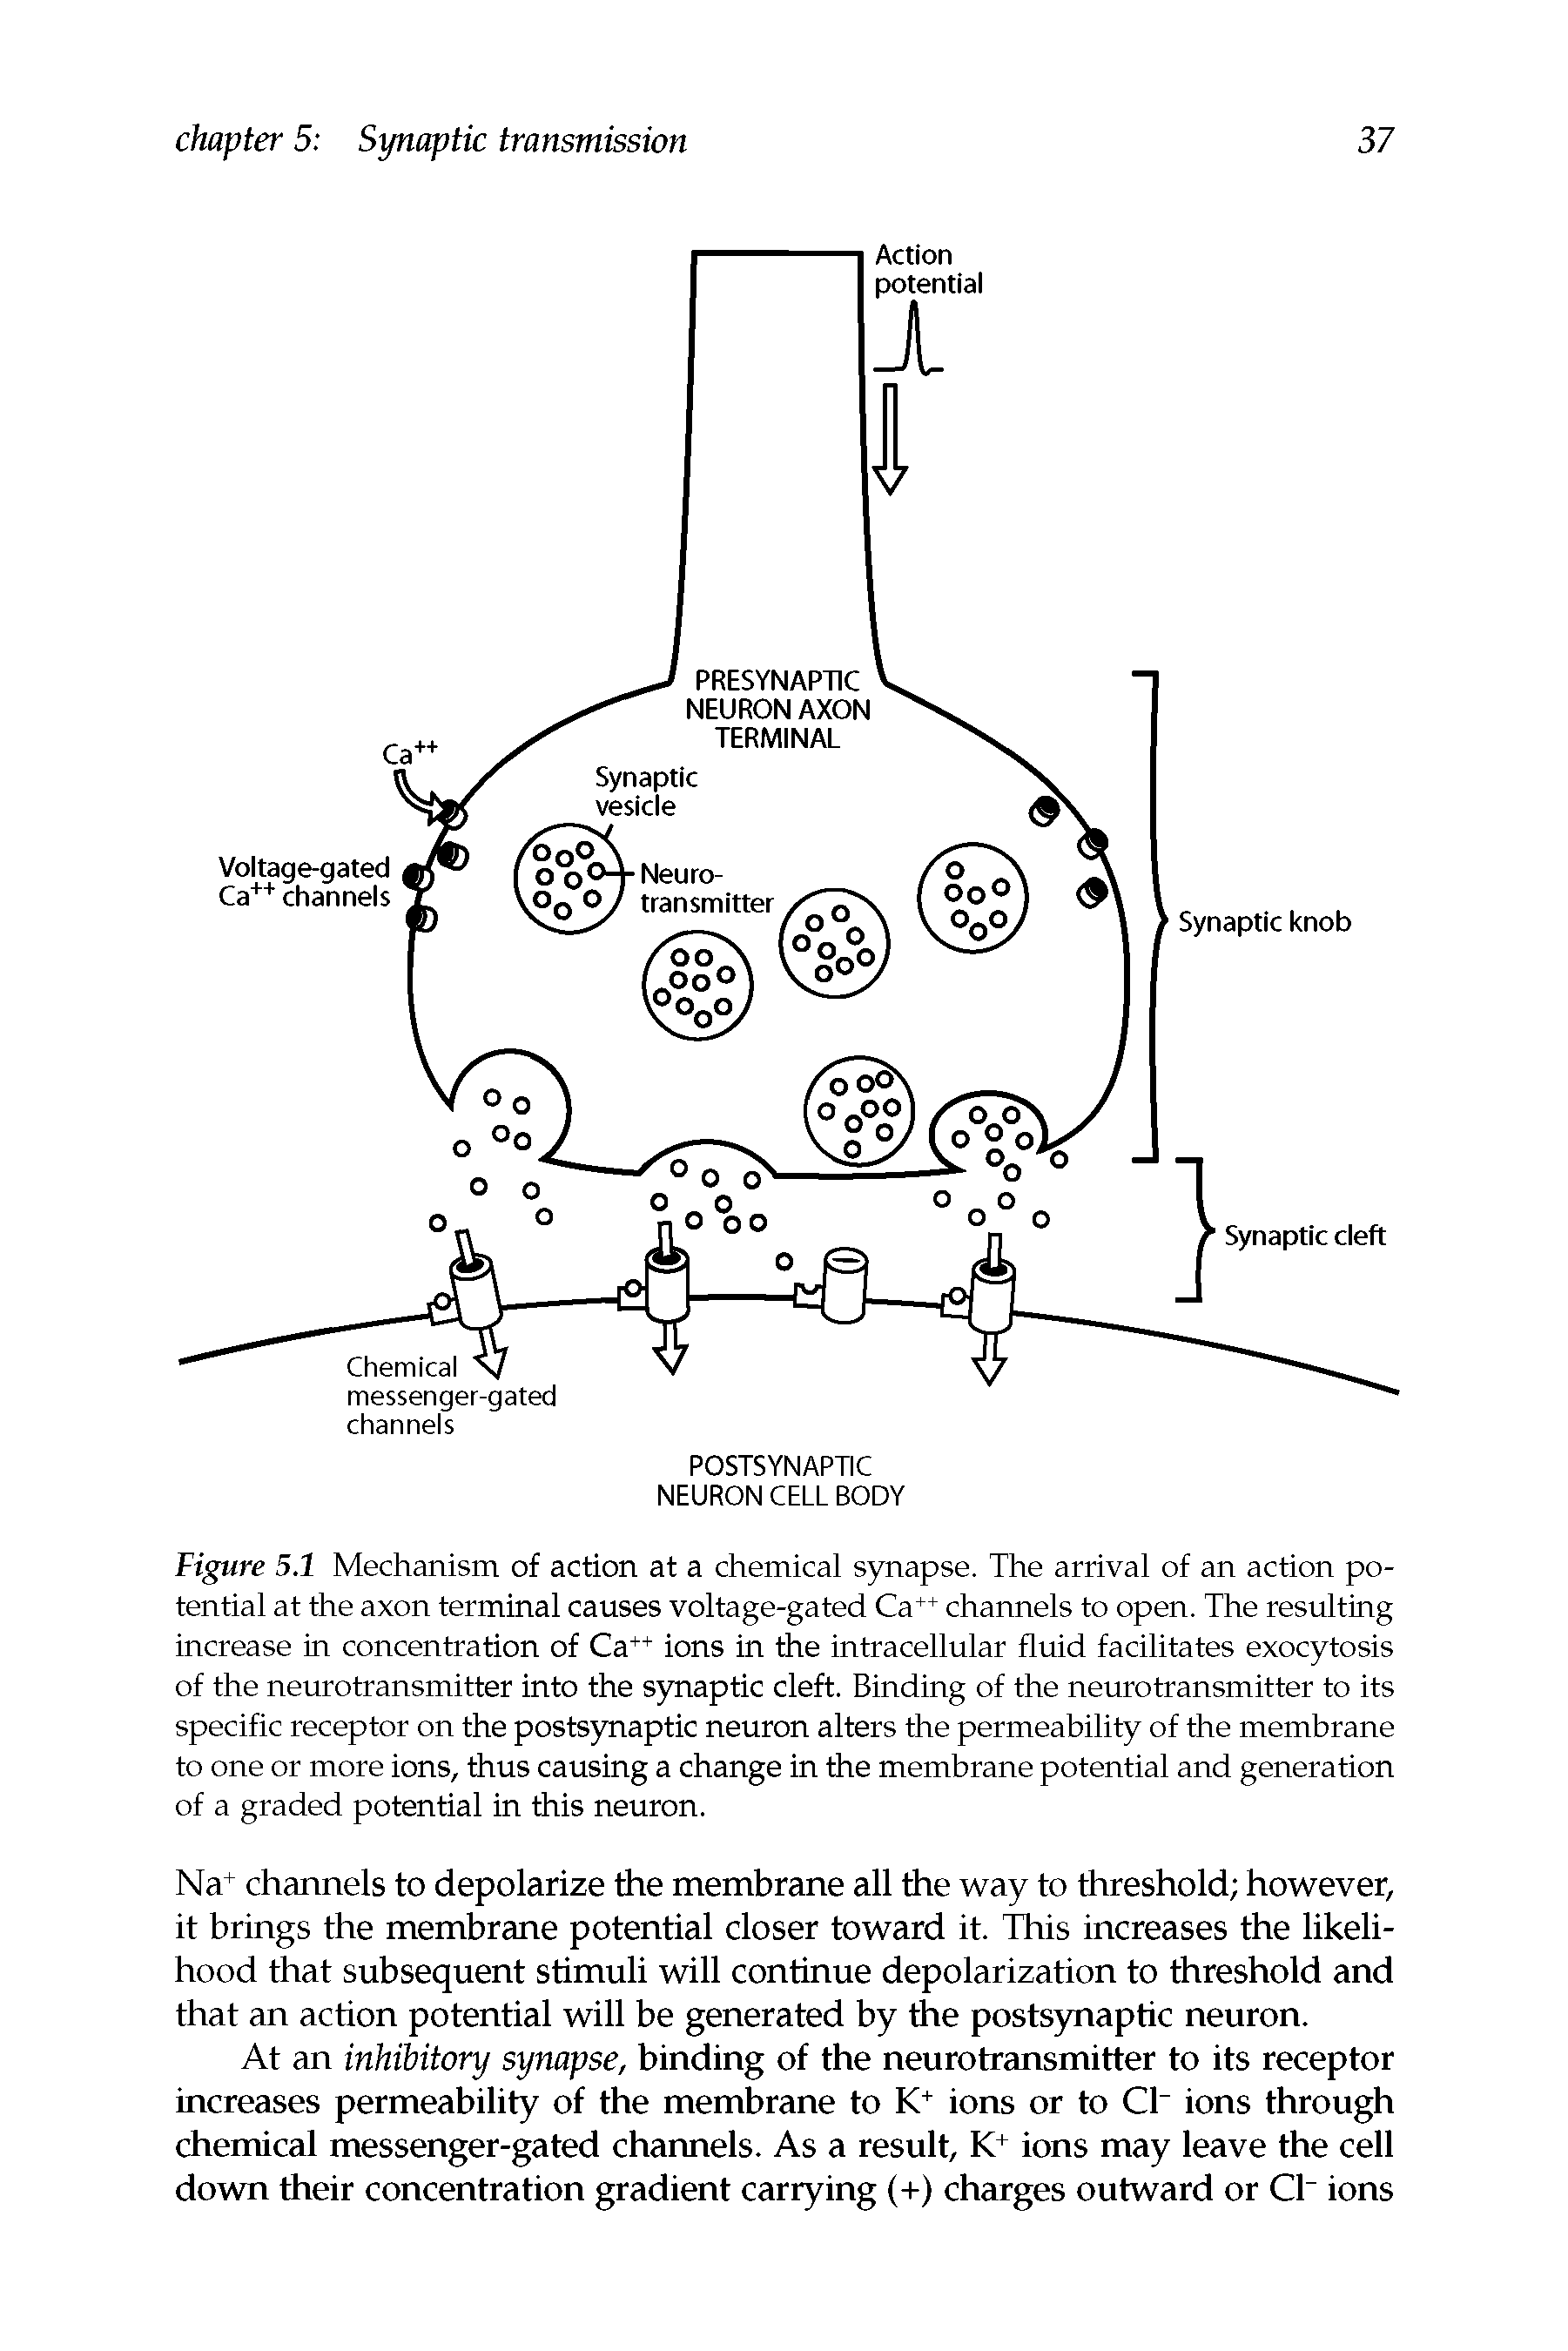 Figure 5.1 Mechanism of action at a chemical synapse. The arrival of an action potential at the axon terminal causes voltage-gated Ca++ channels to open. The resulting increase in concentration of Ca++ ions in the intracellular fluid facilitates exocytosis of the neurotransmitter into the synaptic cleft. Binding of the neurotransmitter to its specific receptor on the postsynaptic neuron alters the permeability of the membrane to one or more ions, thus causing a change in the membrane potential and generation of a graded potential in this neuron.